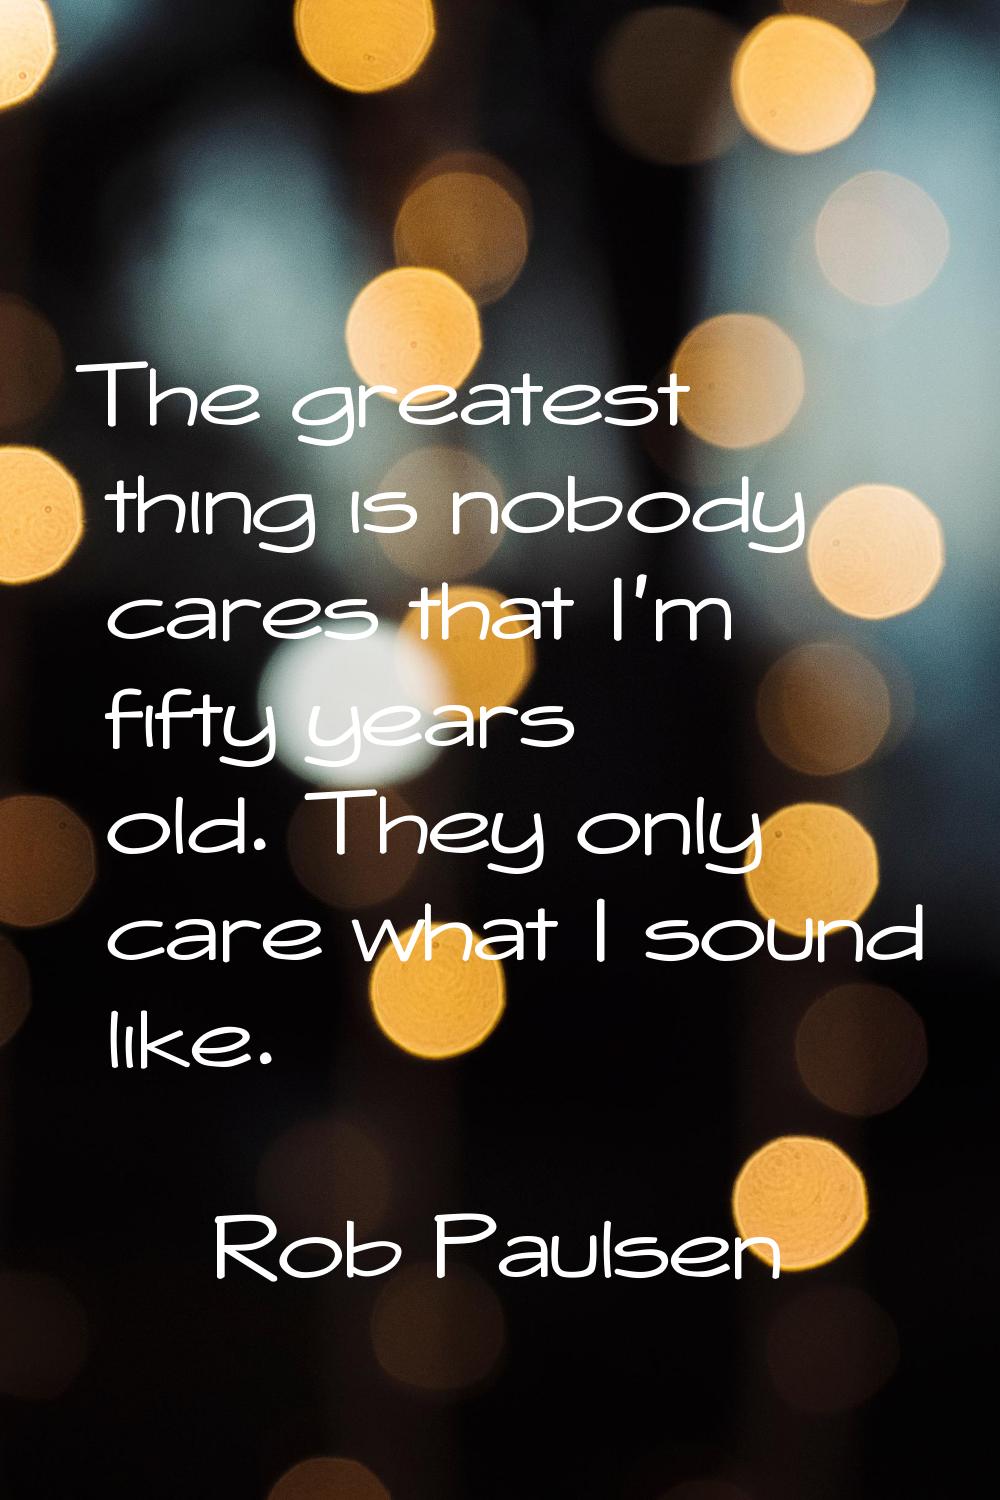 The greatest thing is nobody cares that I'm fifty years old. They only care what I sound like.